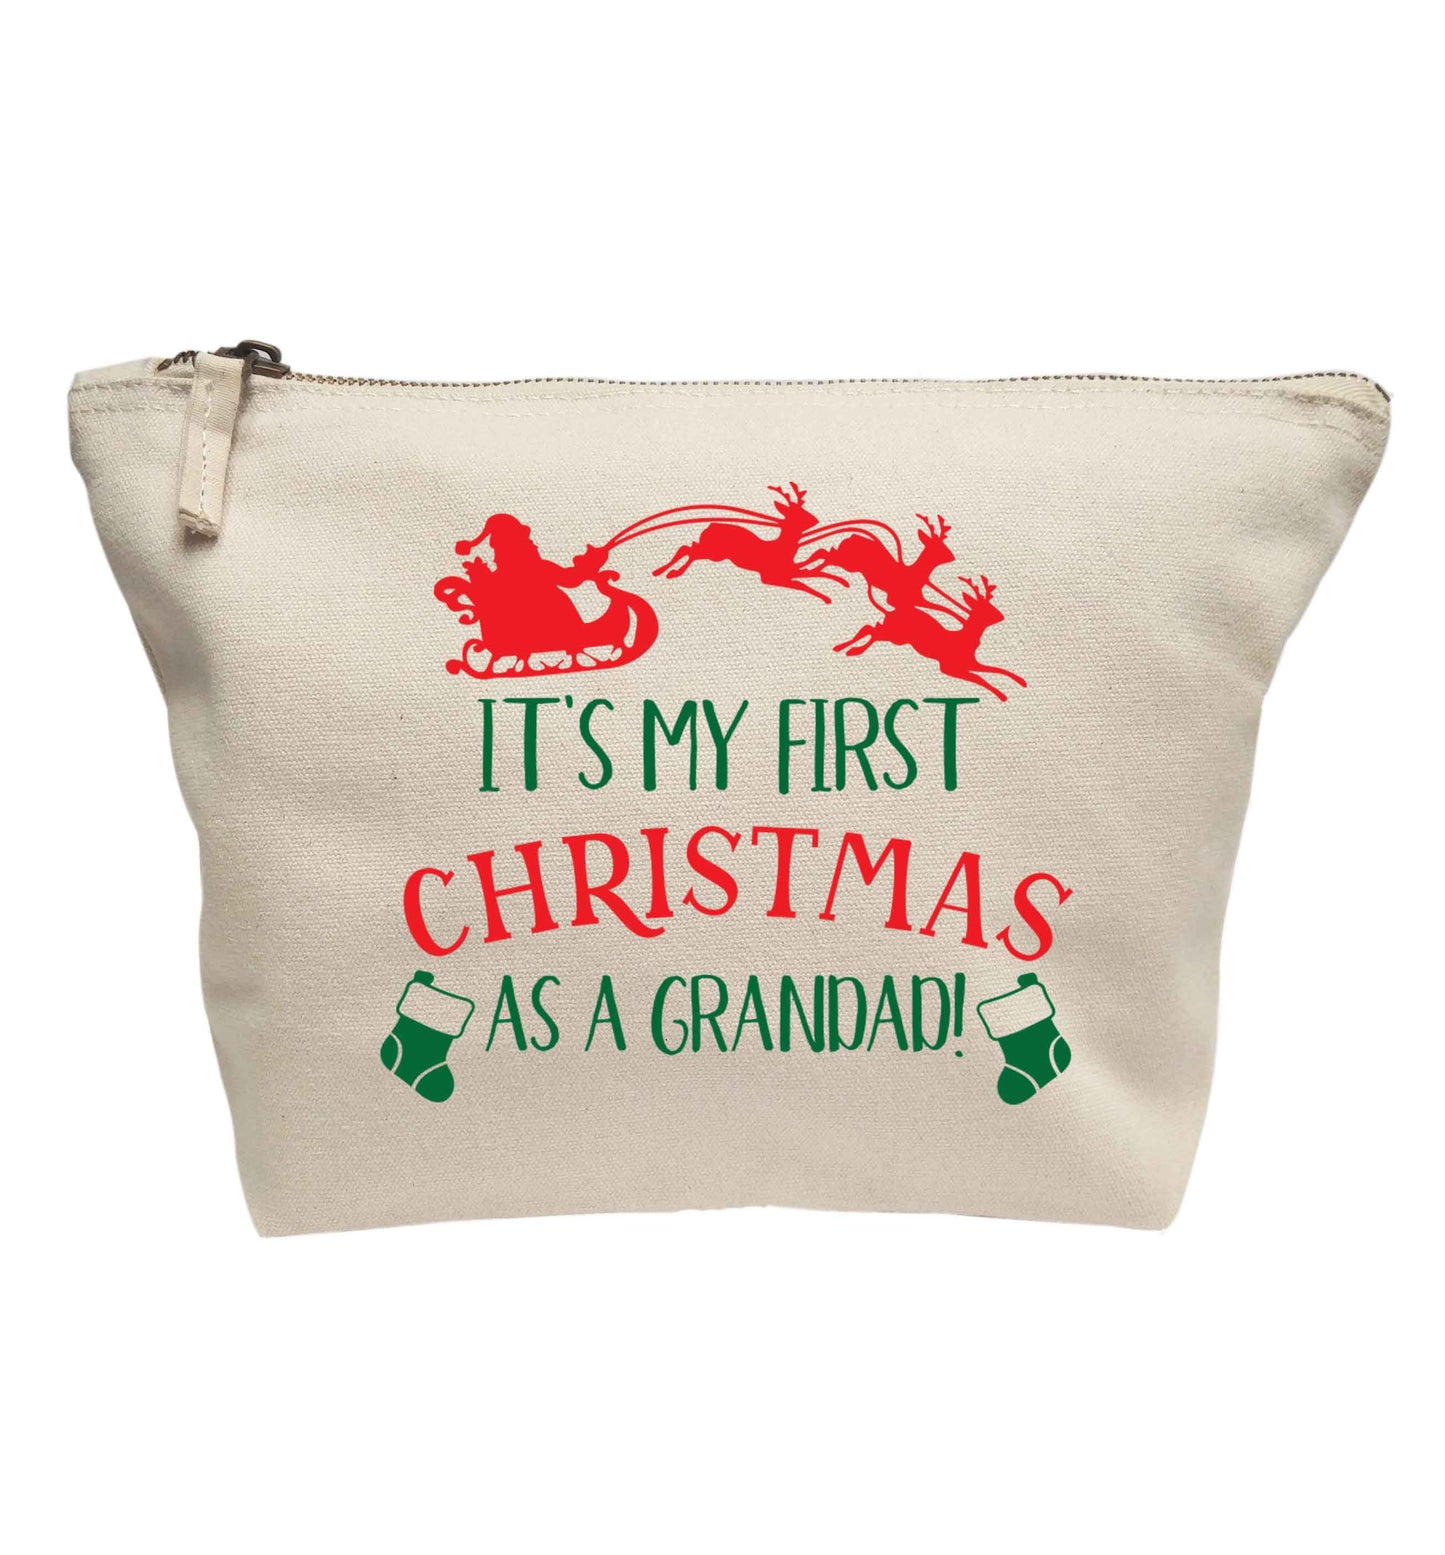 It's my first Christmas as a grandad! | makeup / wash bag